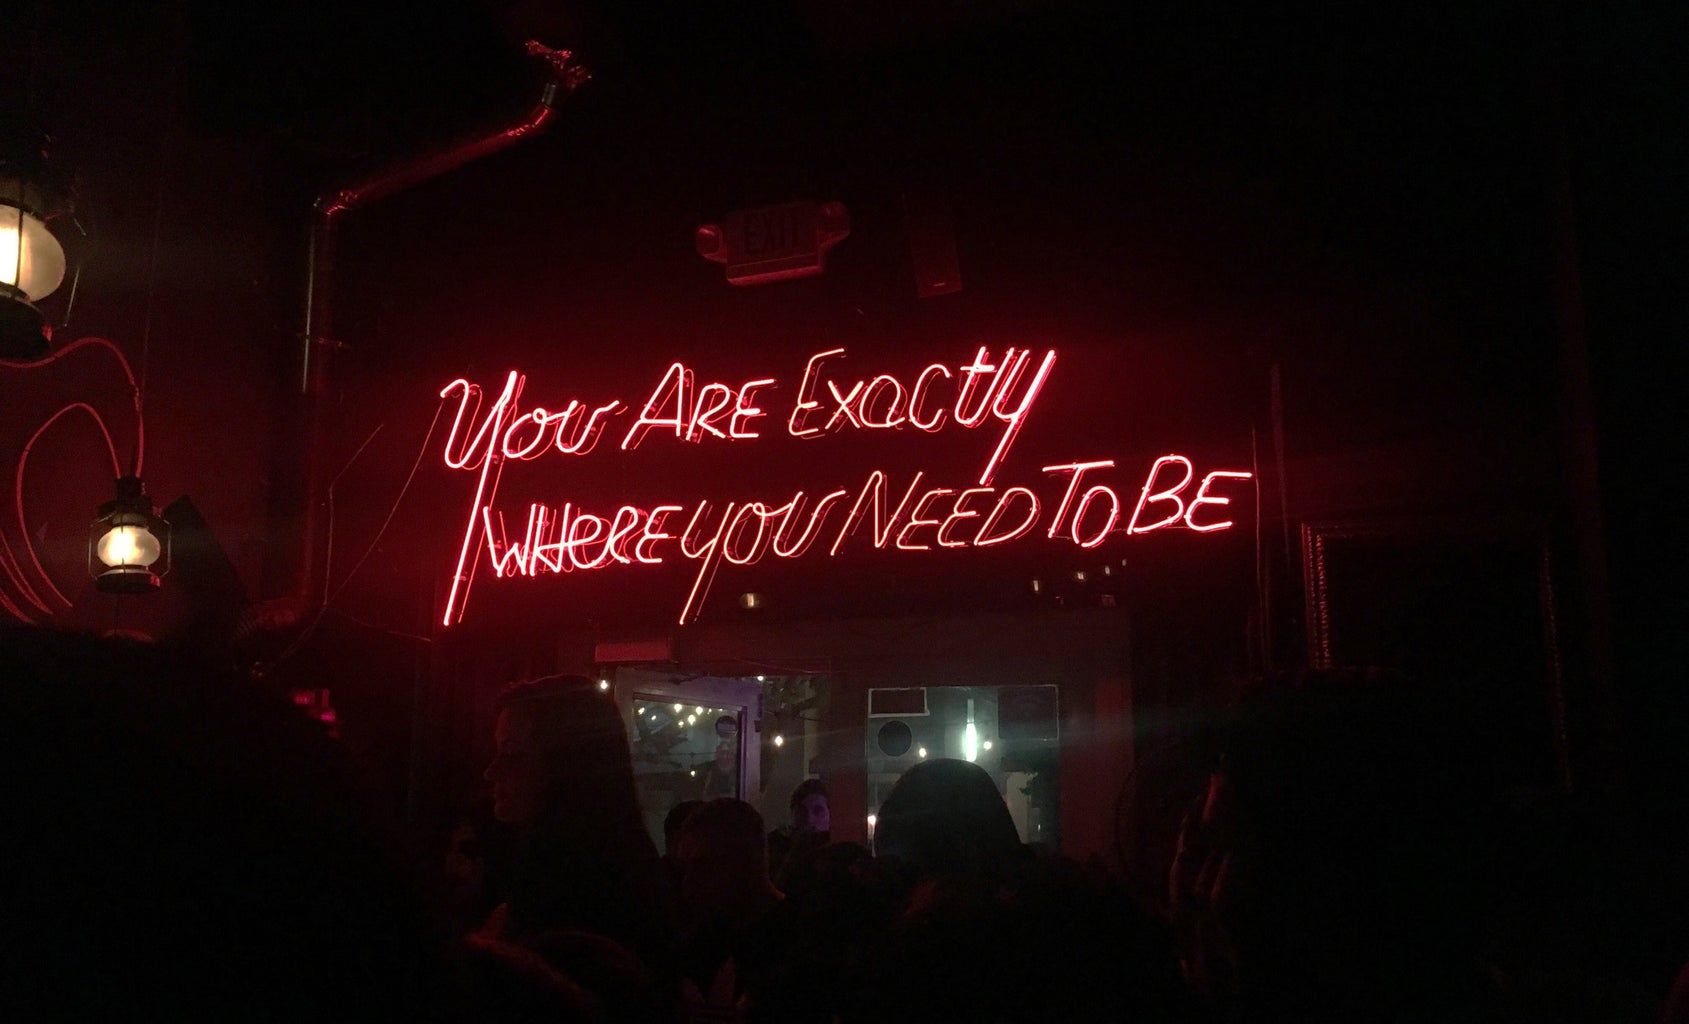 Lindsay Thompson-Neon Sign Where You Need To Be Miami Bar Inspiration